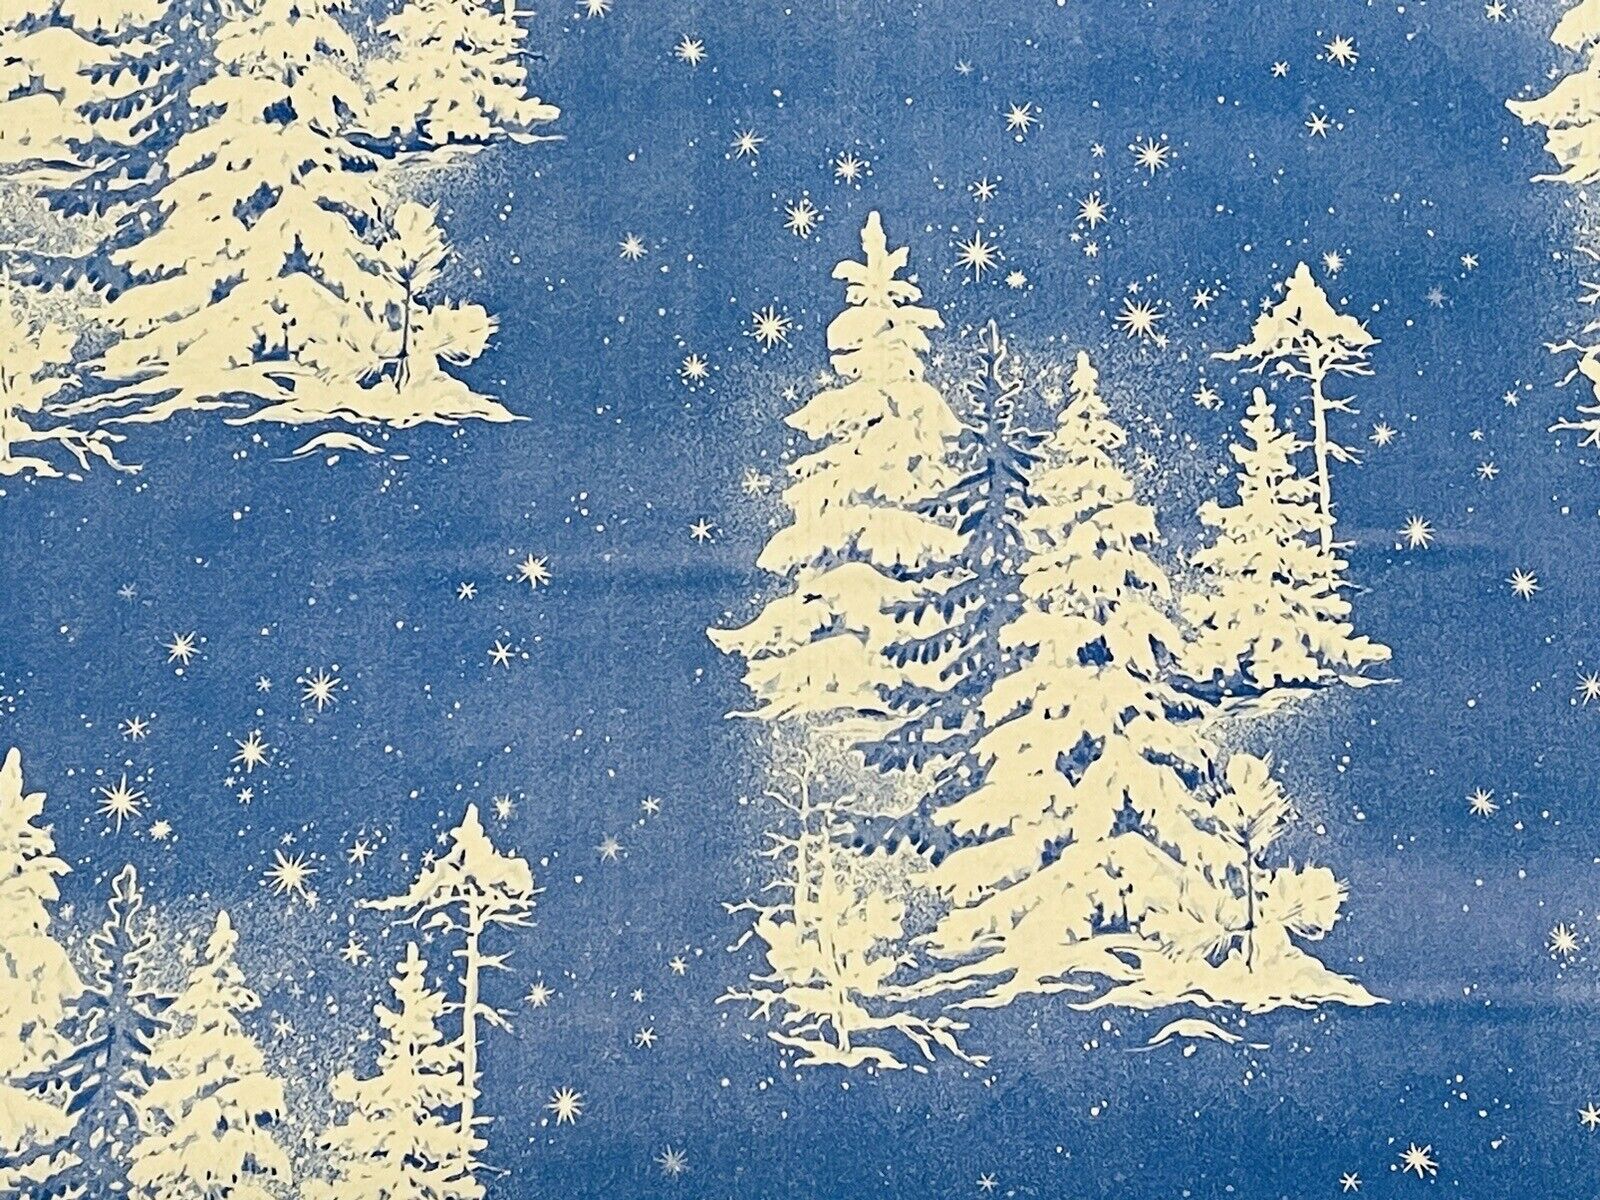 VTG CHRISTMAS WRAPPING PAPER 2 YARDS GIFT WRAP SNOW COVERED TREES ON BLUE  NOS